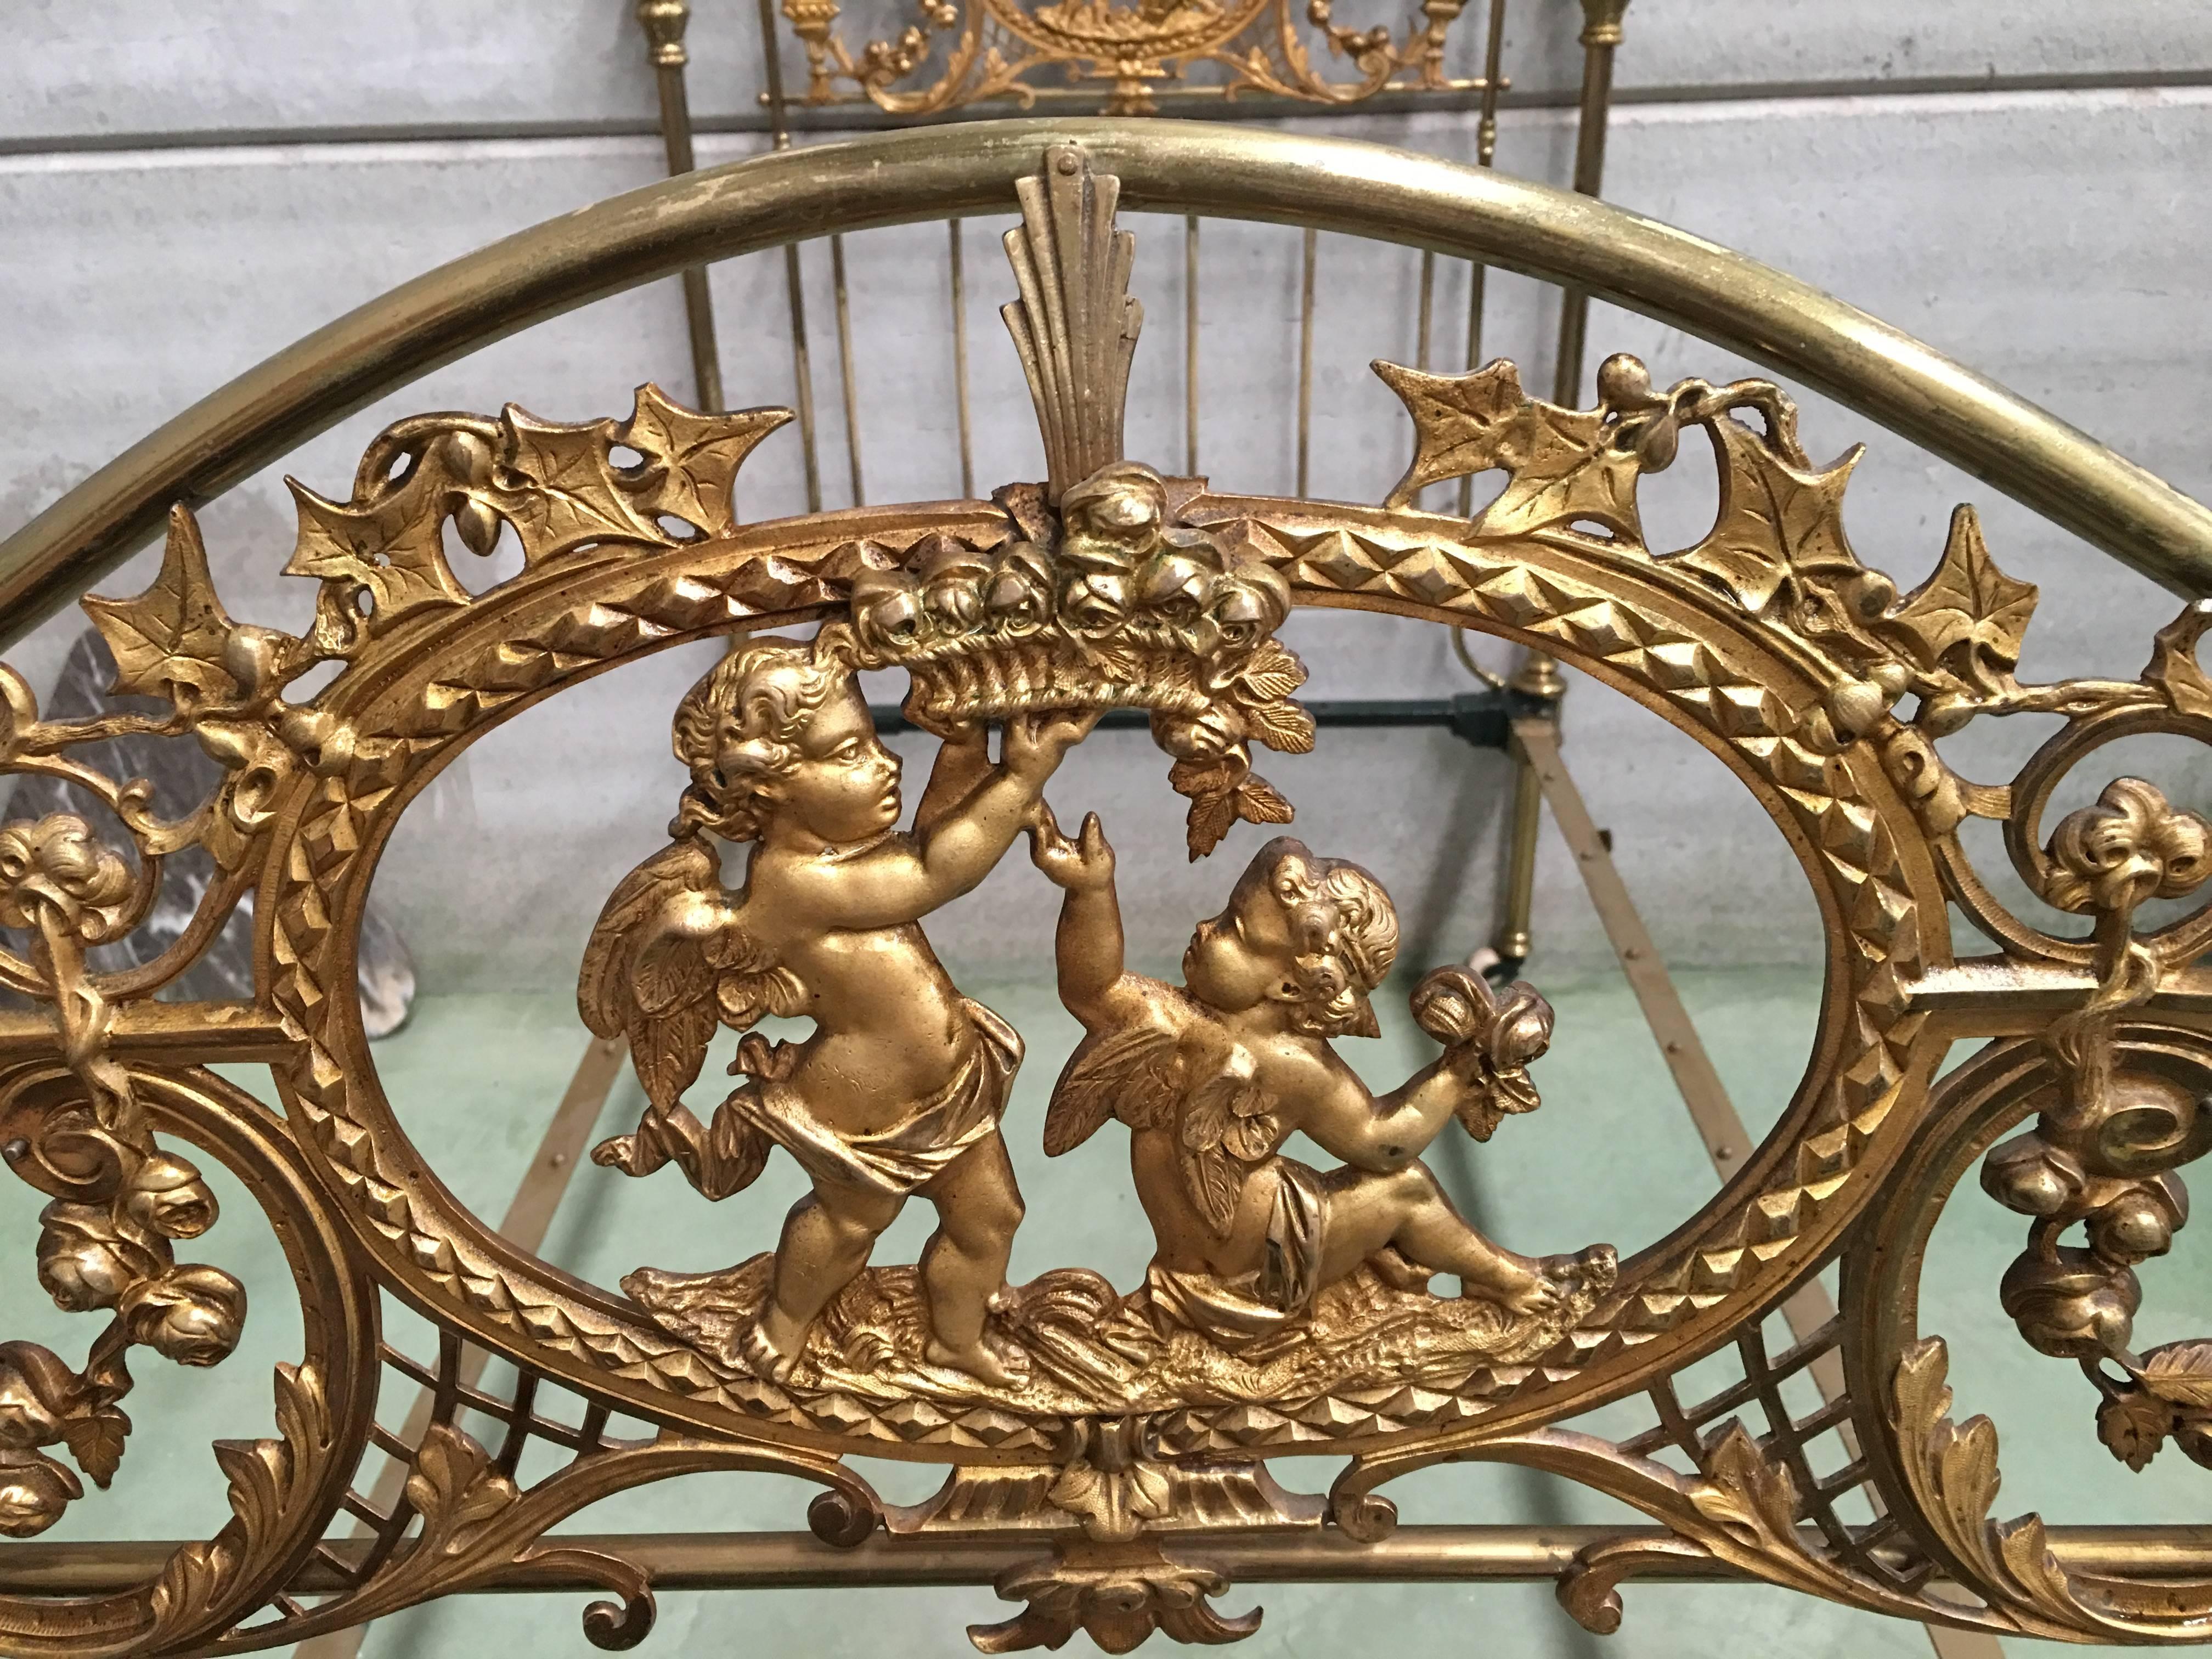 English Bronze and Brass Twin Extra Large Bed with Cherubs, Headboard, Signed 1